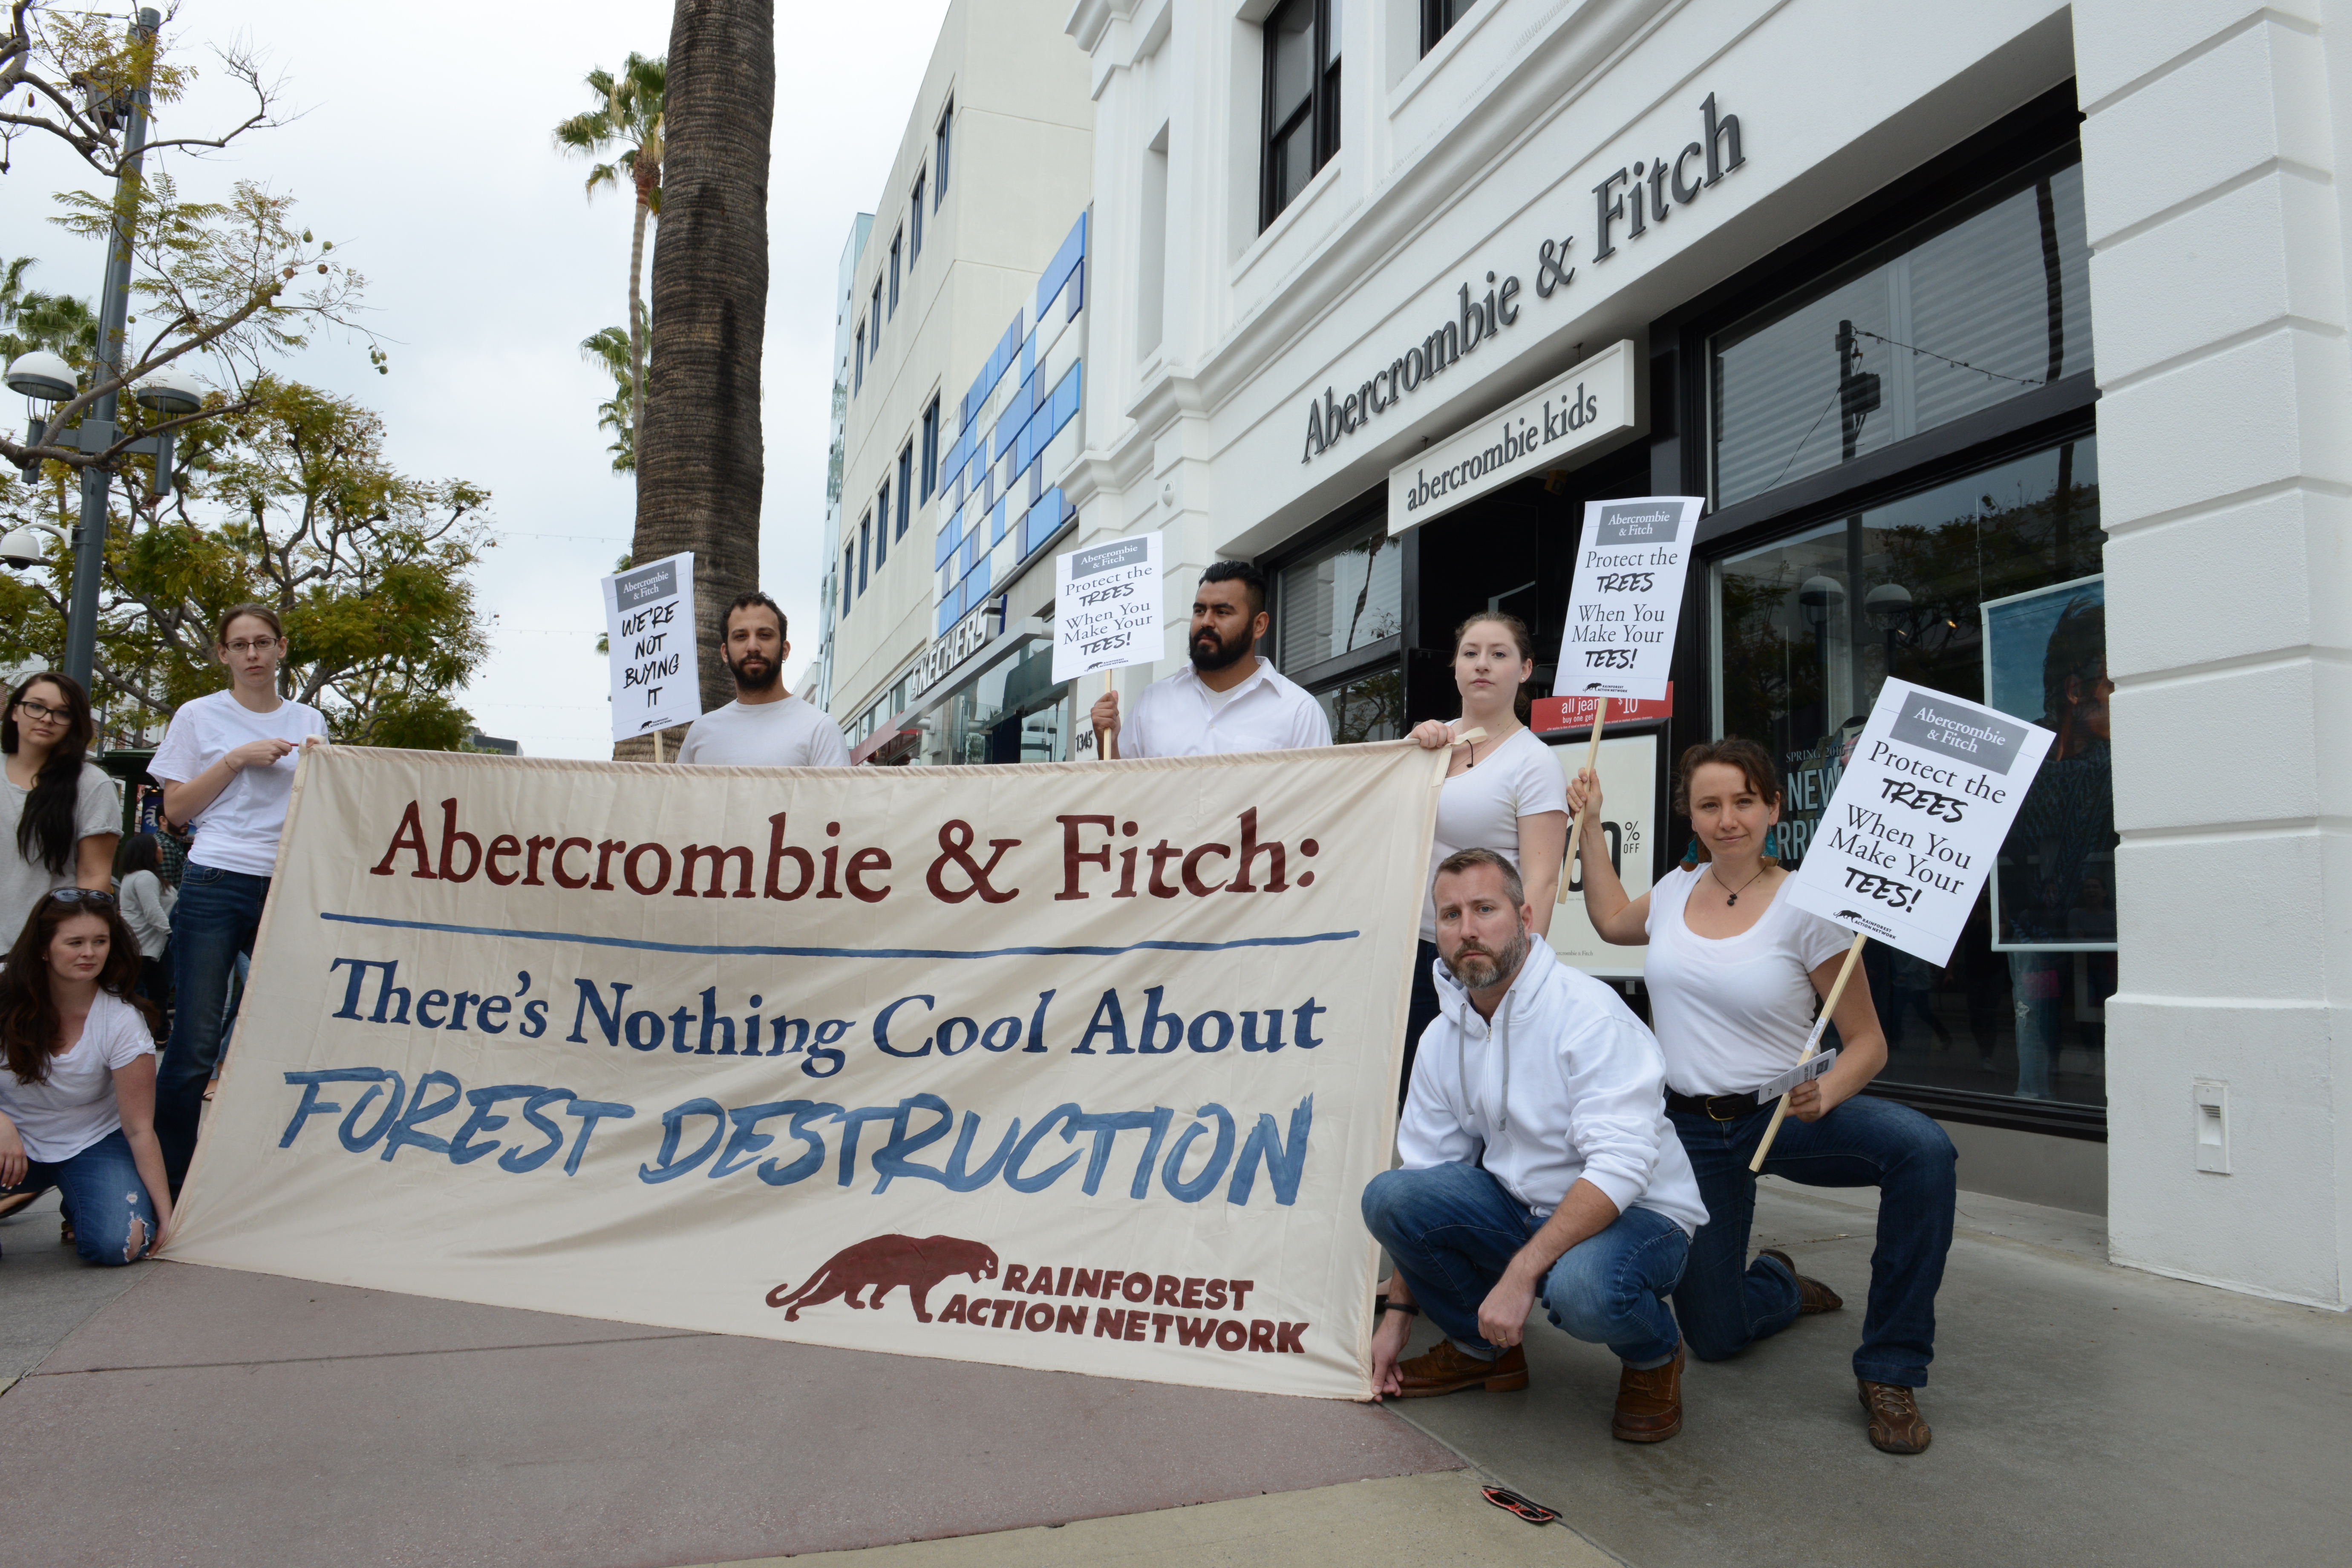 abercrombie and fitch press release